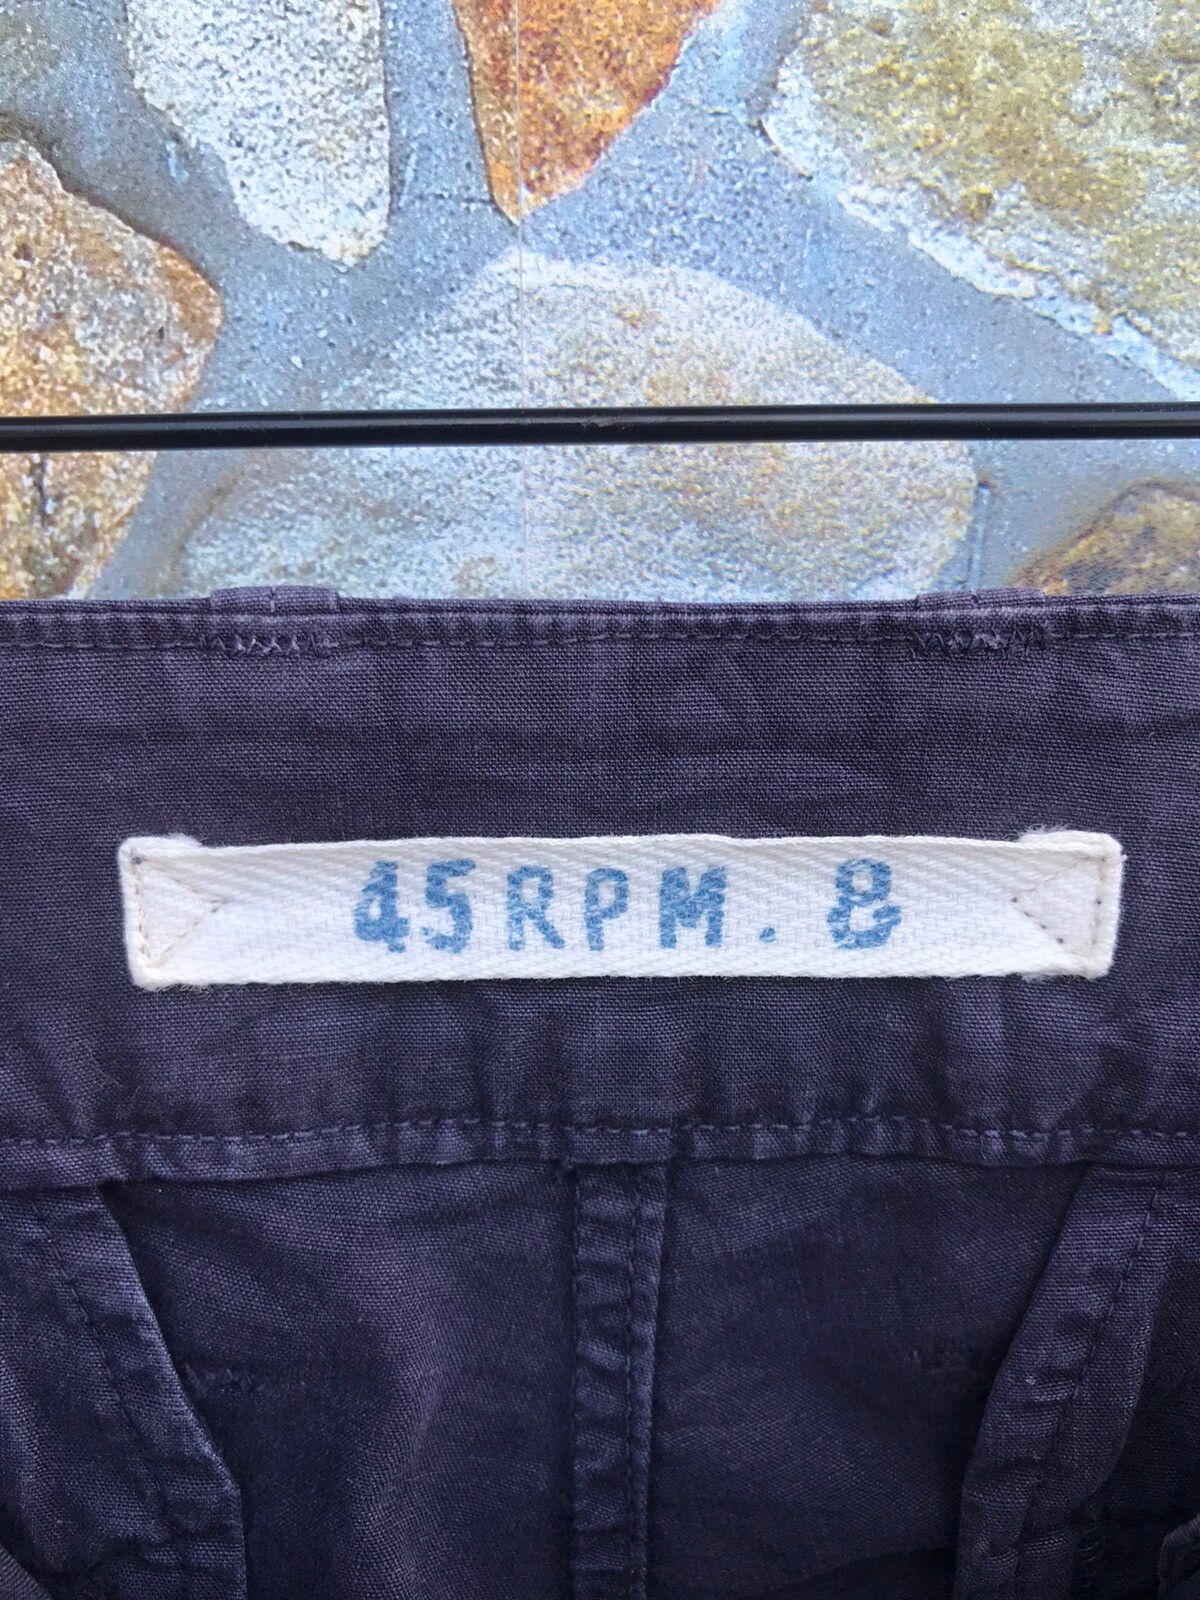 45Rpm Pants Made In Japan - 3